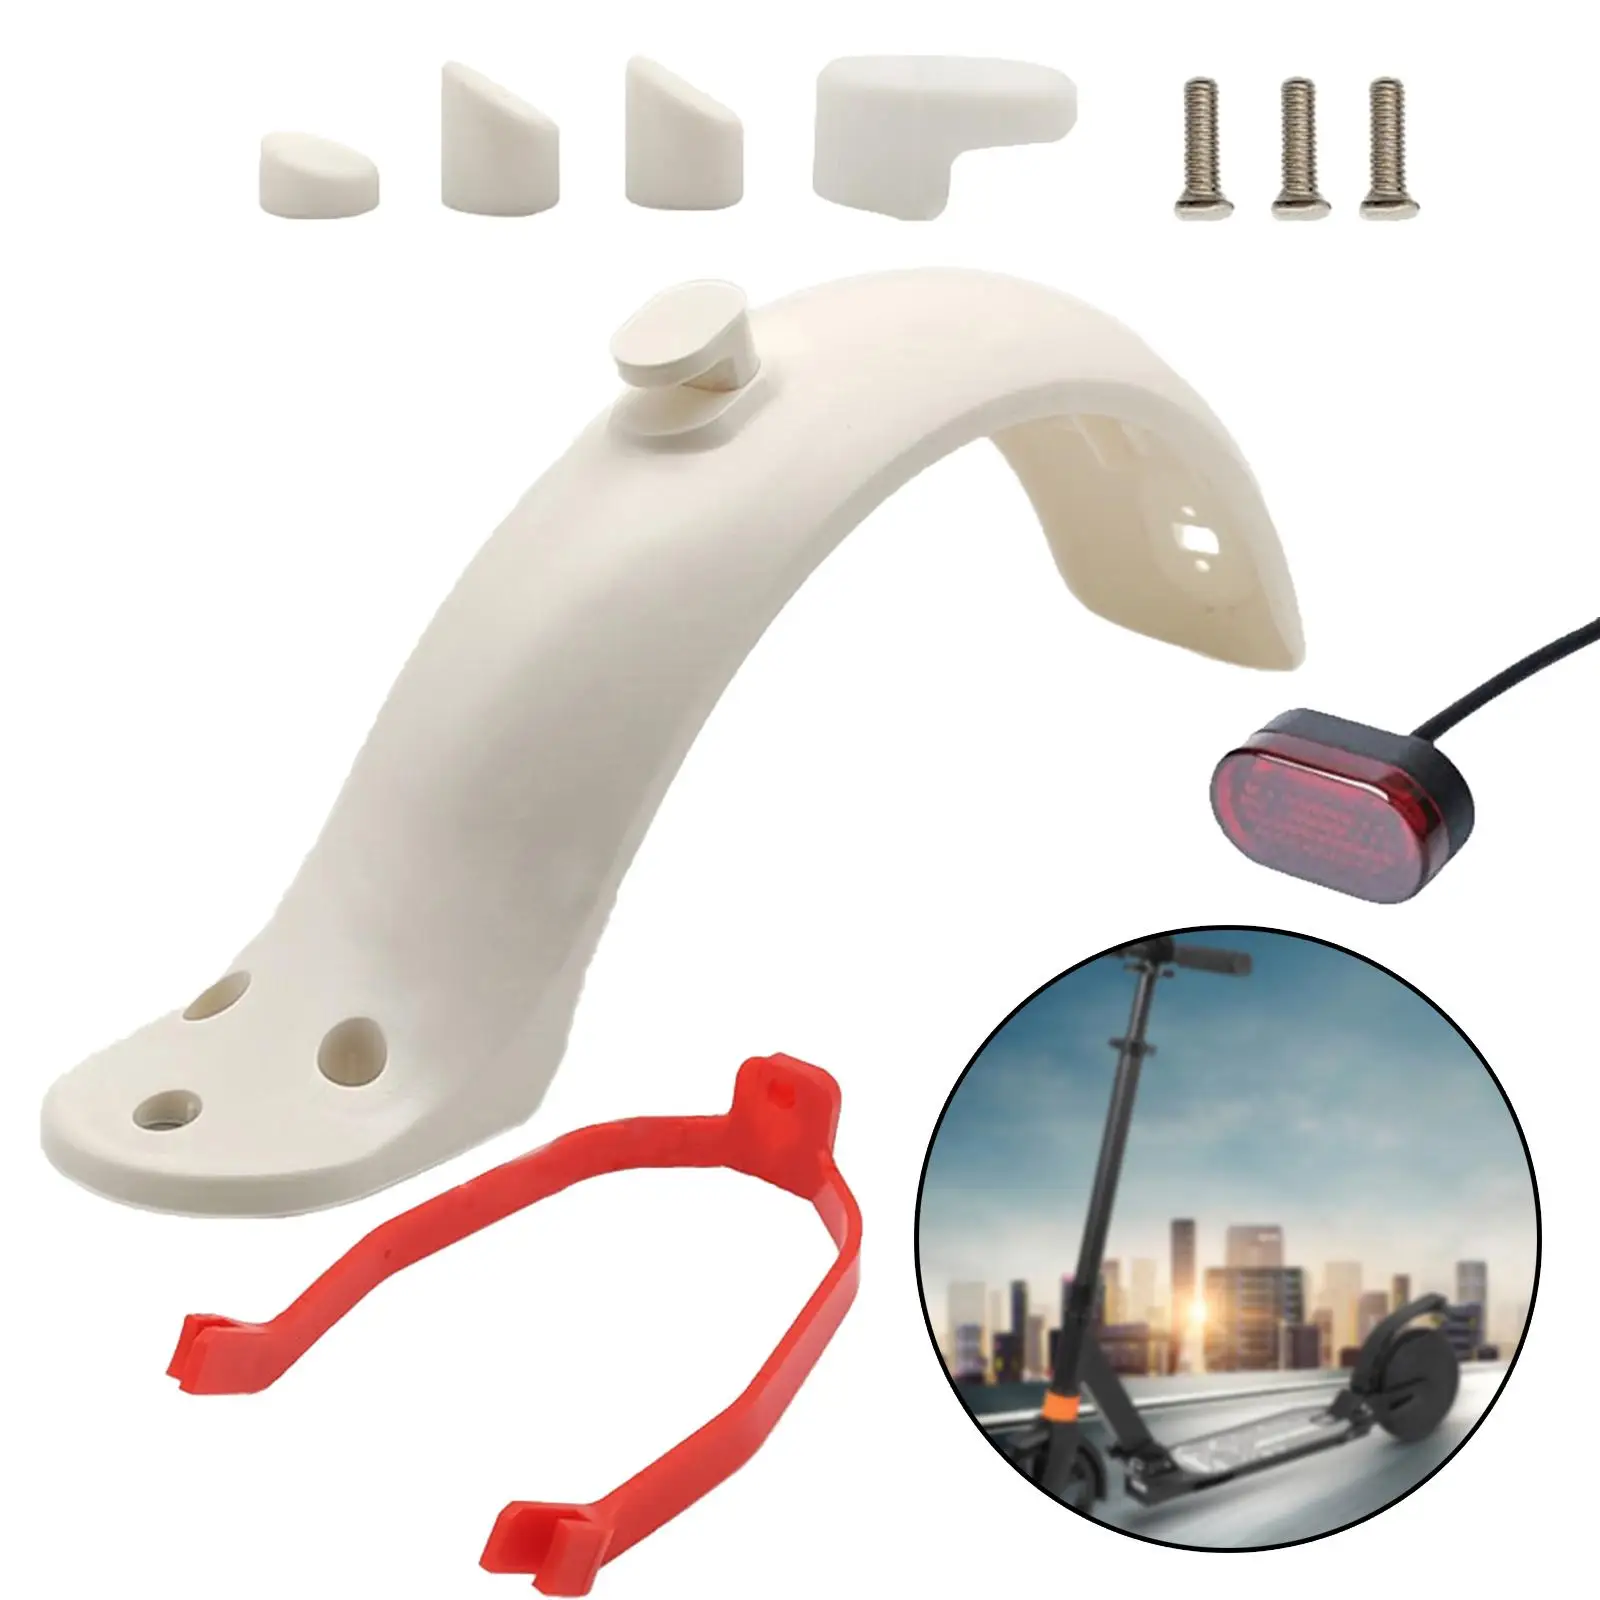 Rear Fender Mudguard Set Tire Splash Guard Accessories for Electric Scooter